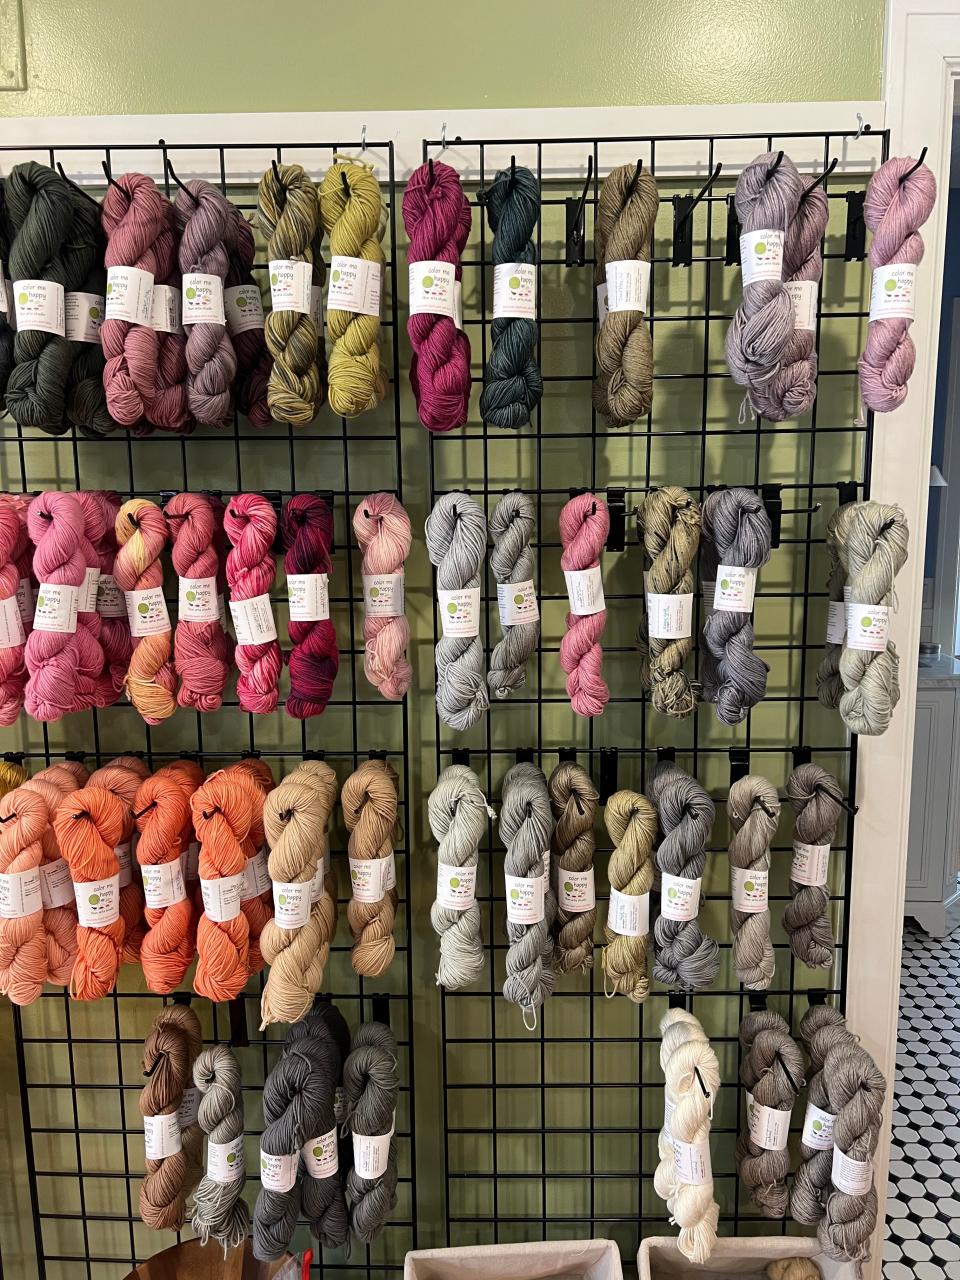 Michelle Saylers and Linda Williams have a wall of hand-made dyed yarns. They’ve been making sure to pack each and every bundle of yarn and fabric that they dye in sustainable plastic as well as show people the vibrant colors you can get from plants and vegetables.